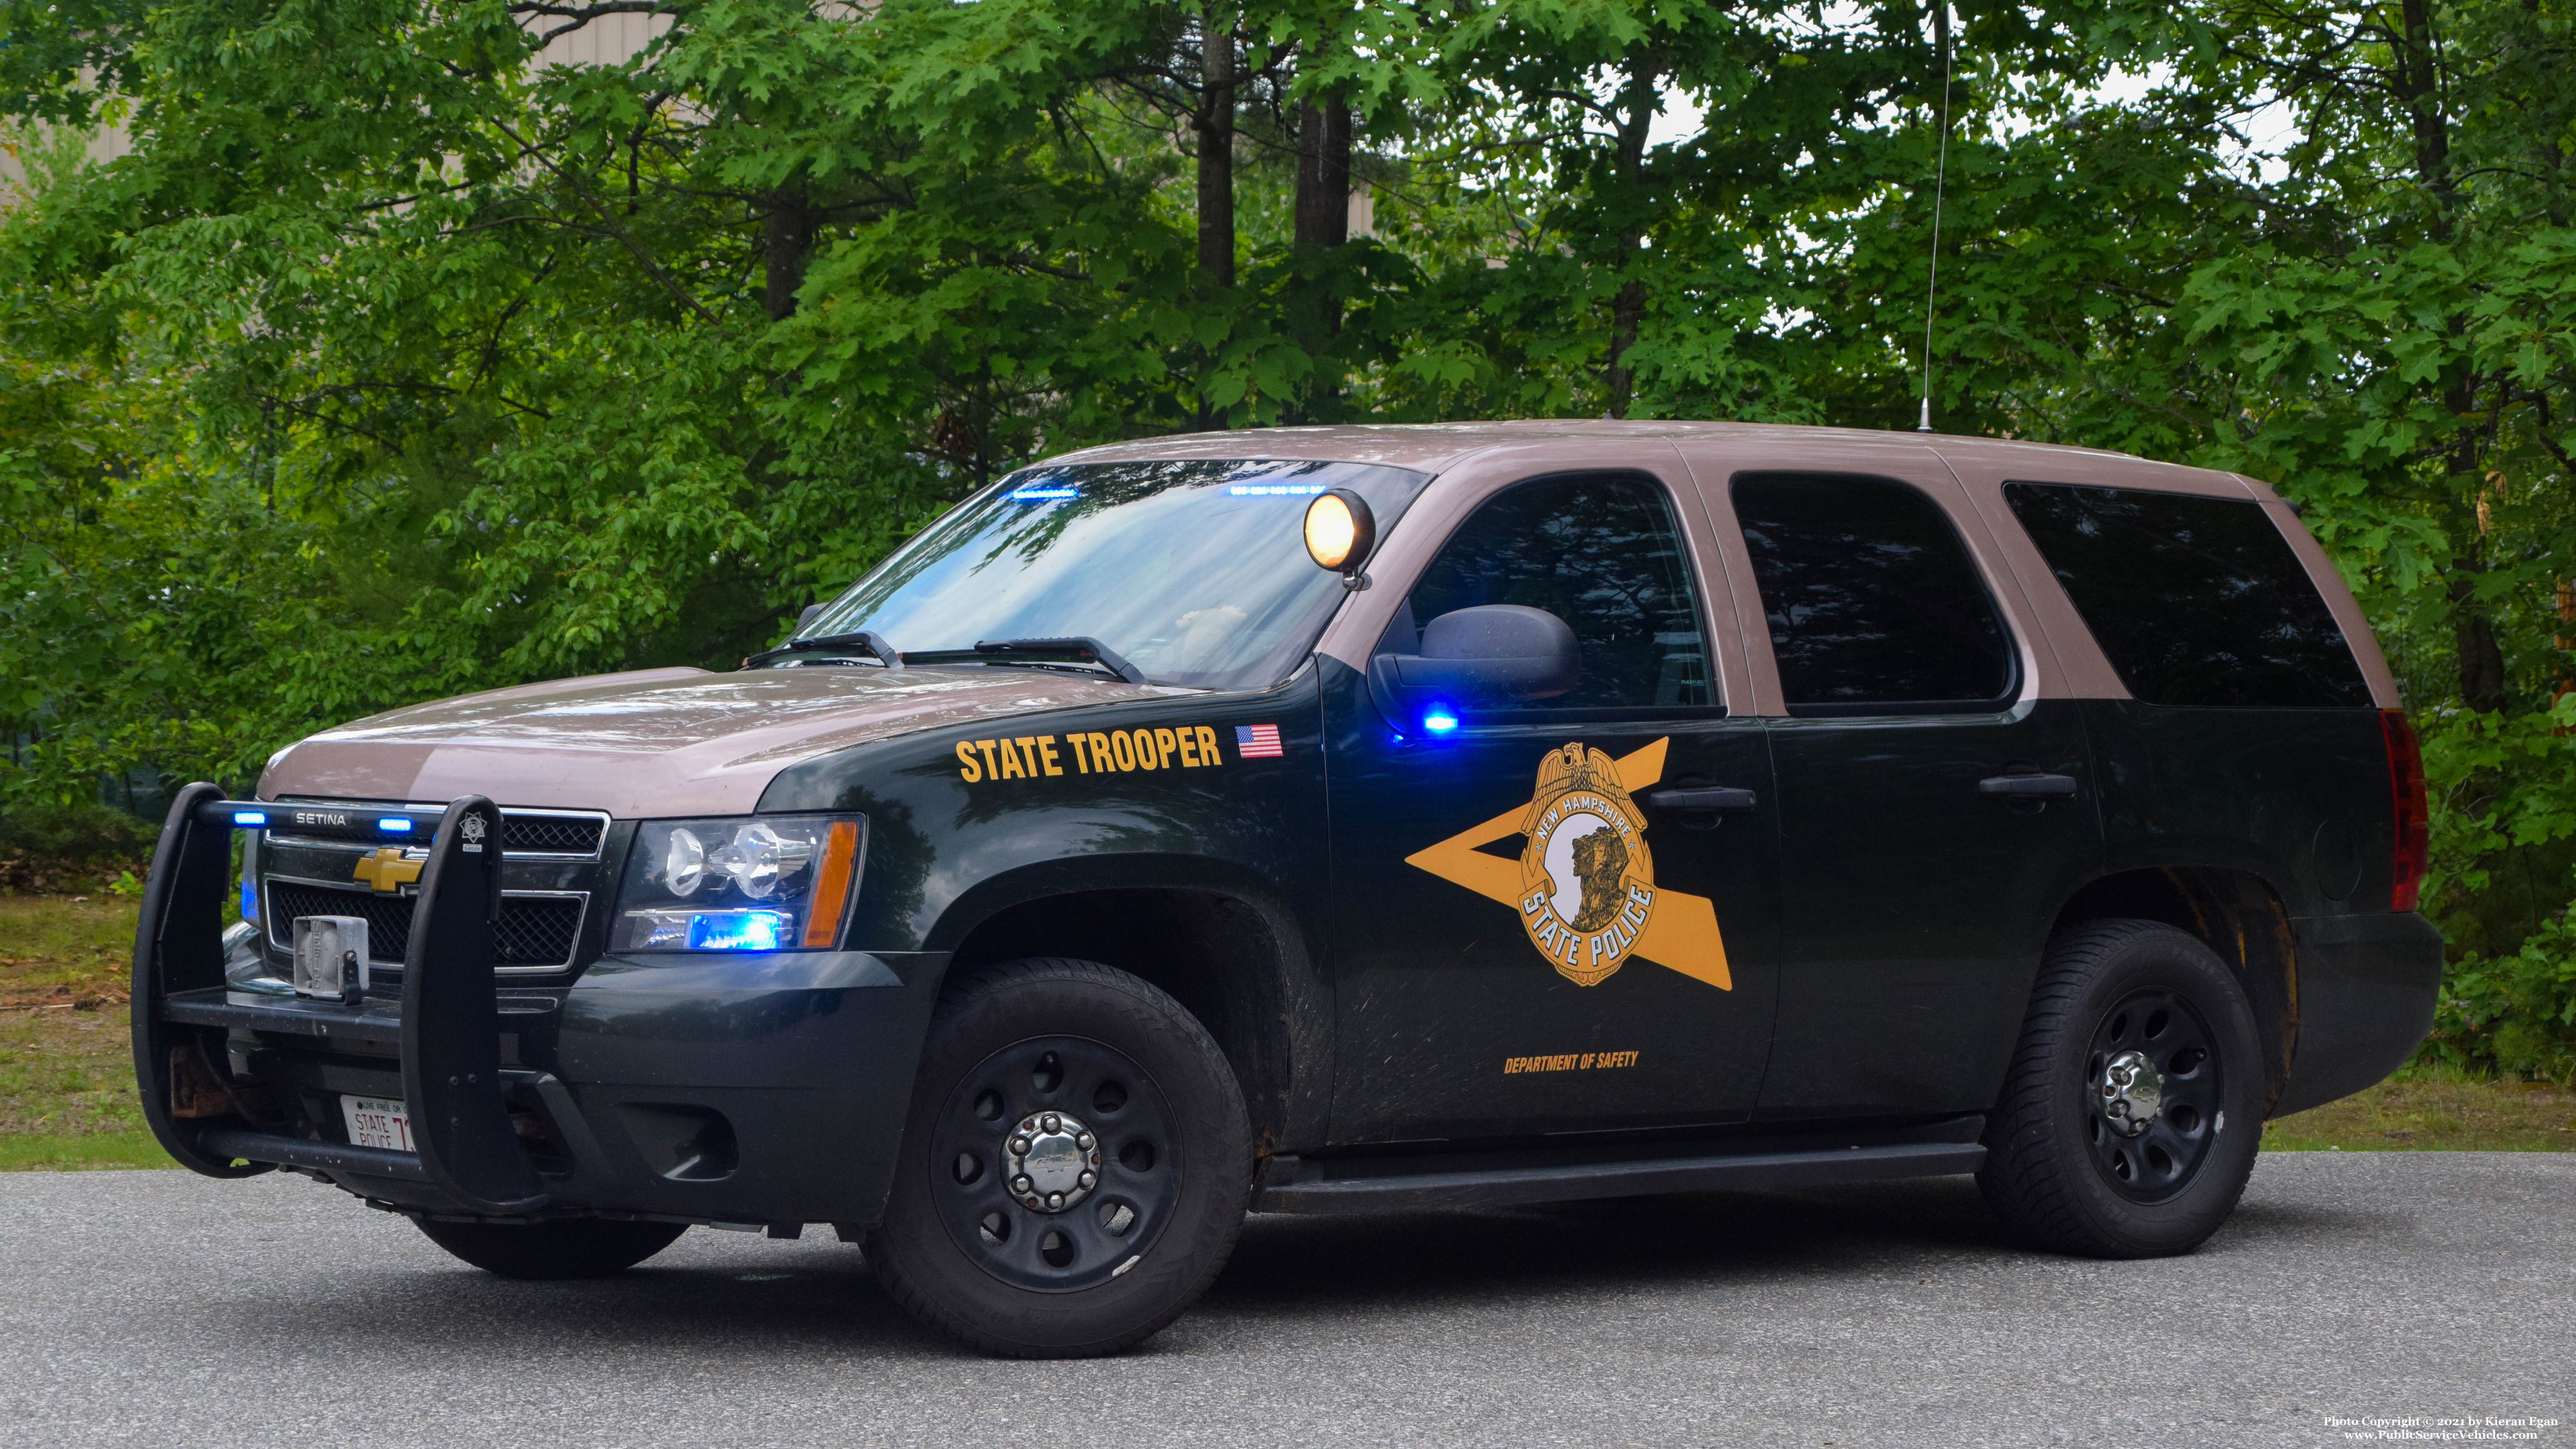 A photo  of New Hampshire State Police
            Cruiser 730, a 2007-2014 Chevrolet Tahoe             taken by Kieran Egan